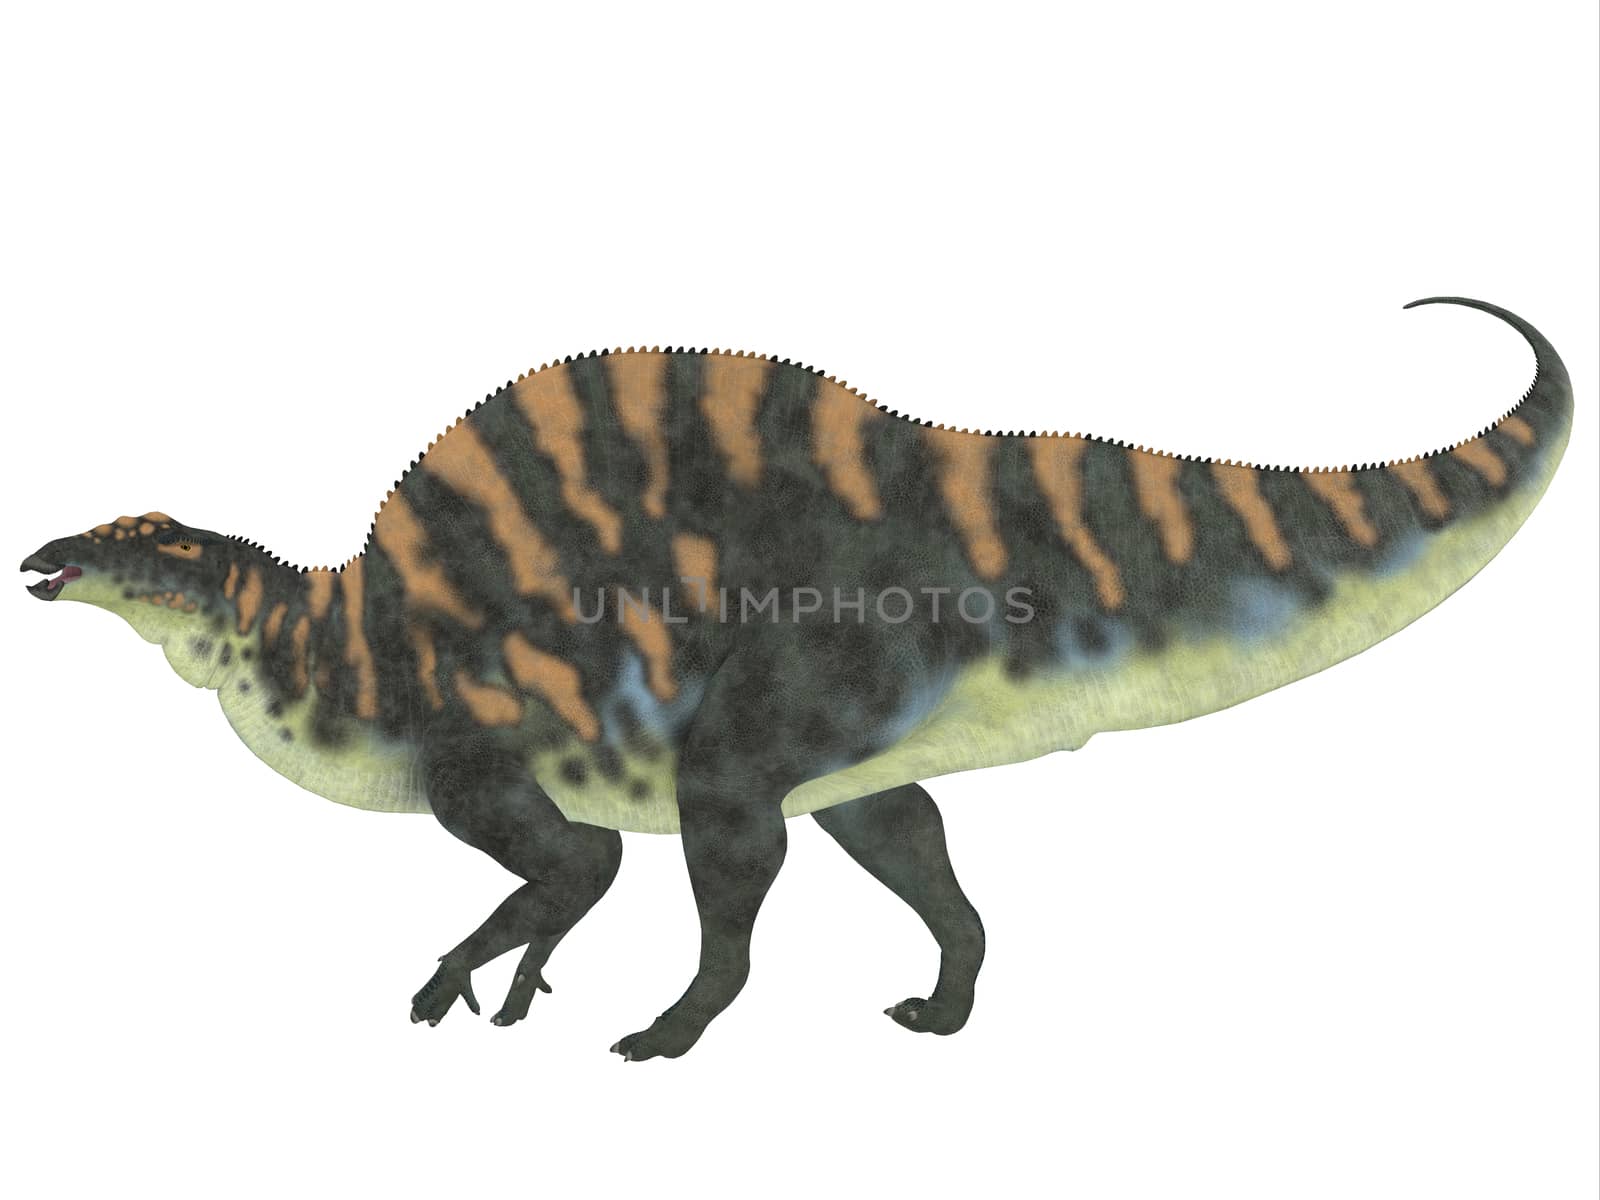 Ouranosaurus was a herbivorous hadrosaur dinosaur that lived during the Cretaceous Period of Africa.